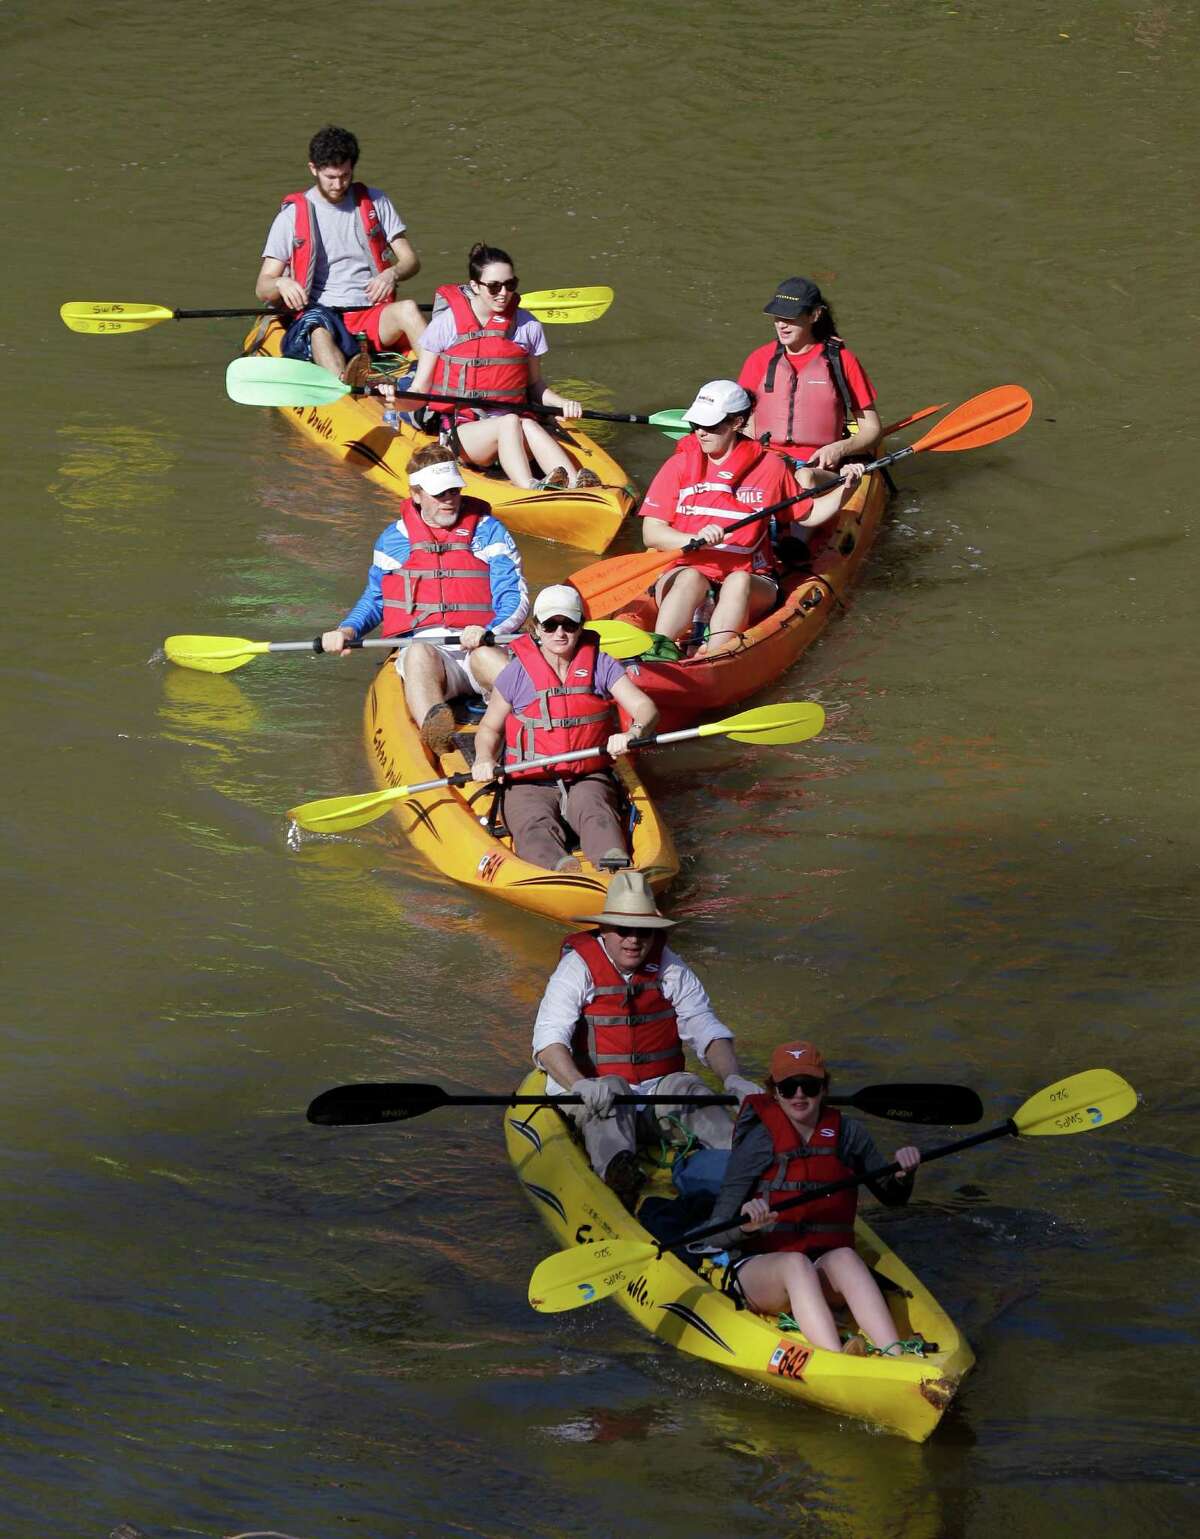 People paddle along during the Buffalo Bayou Regatta Saturday, March 16, 2013 in Houston. At least 500 boats are participating in the 15 mile race. (Melissa Phillip / Houston Chronicle)